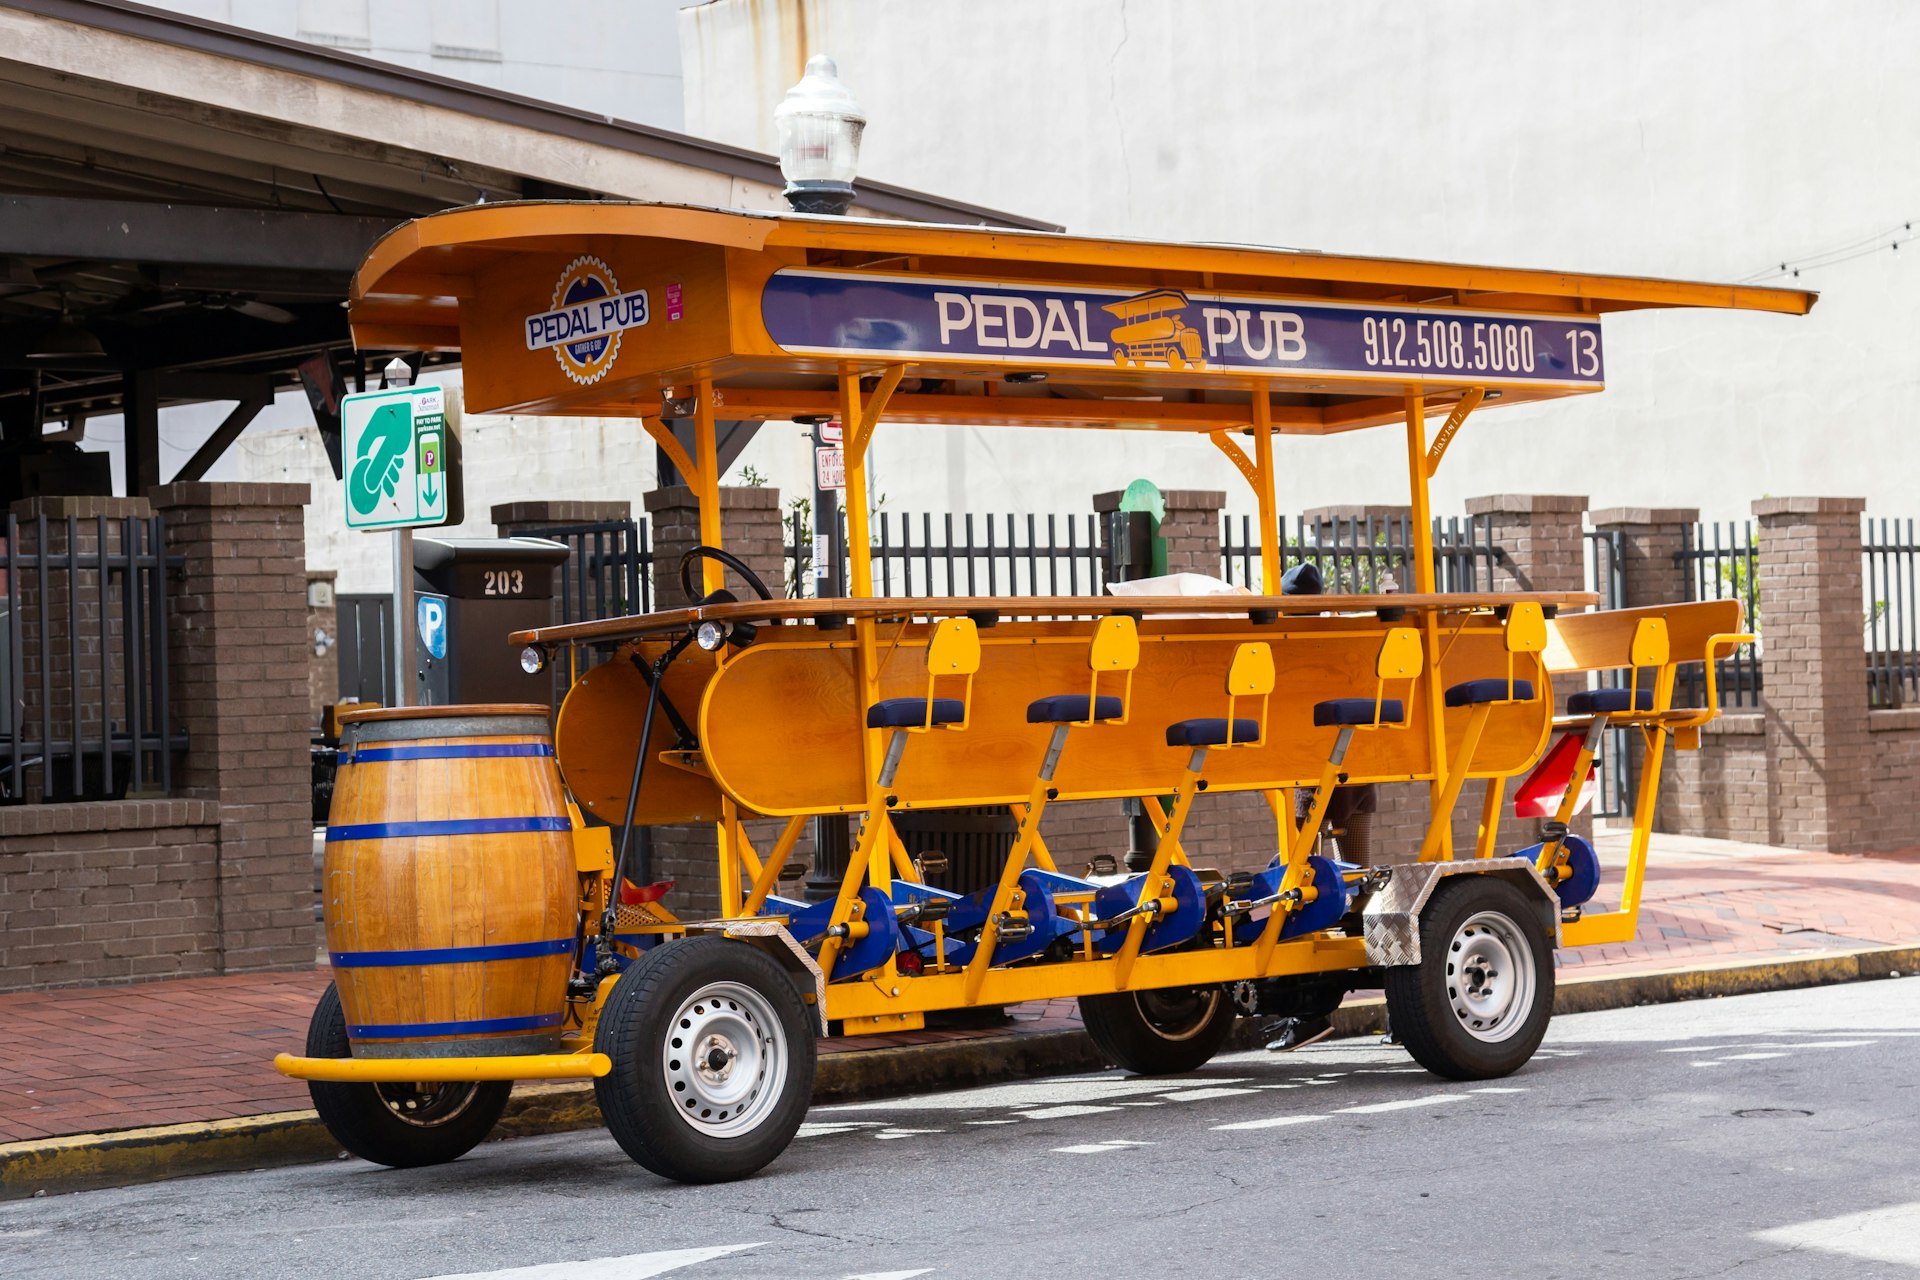 Cute empty Pedal Pub bus parked in street in the famous City Market sector in Savannah